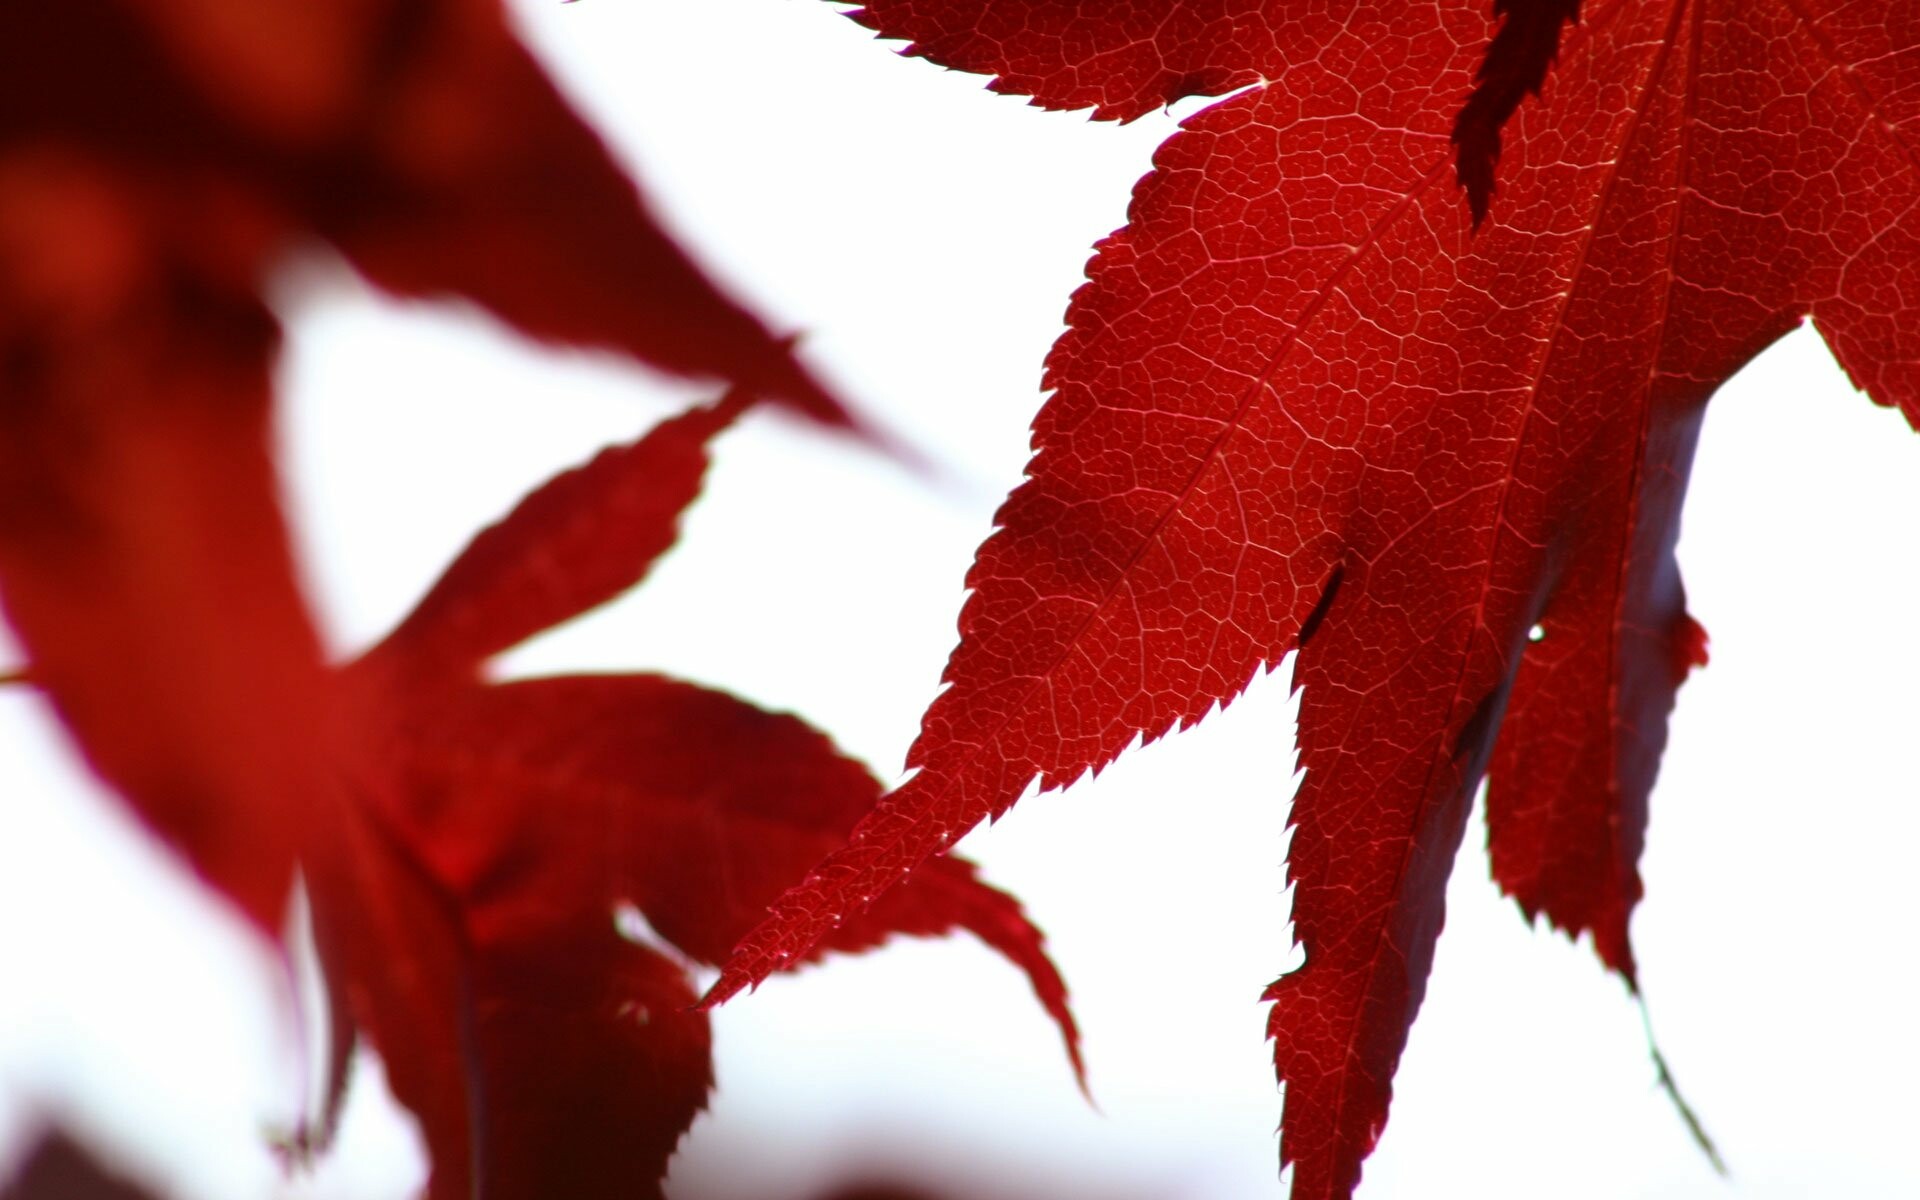 Leaf: A plant organ, functions primarily in food manufacture by photosynthesis. 1920x1200 HD Wallpaper.